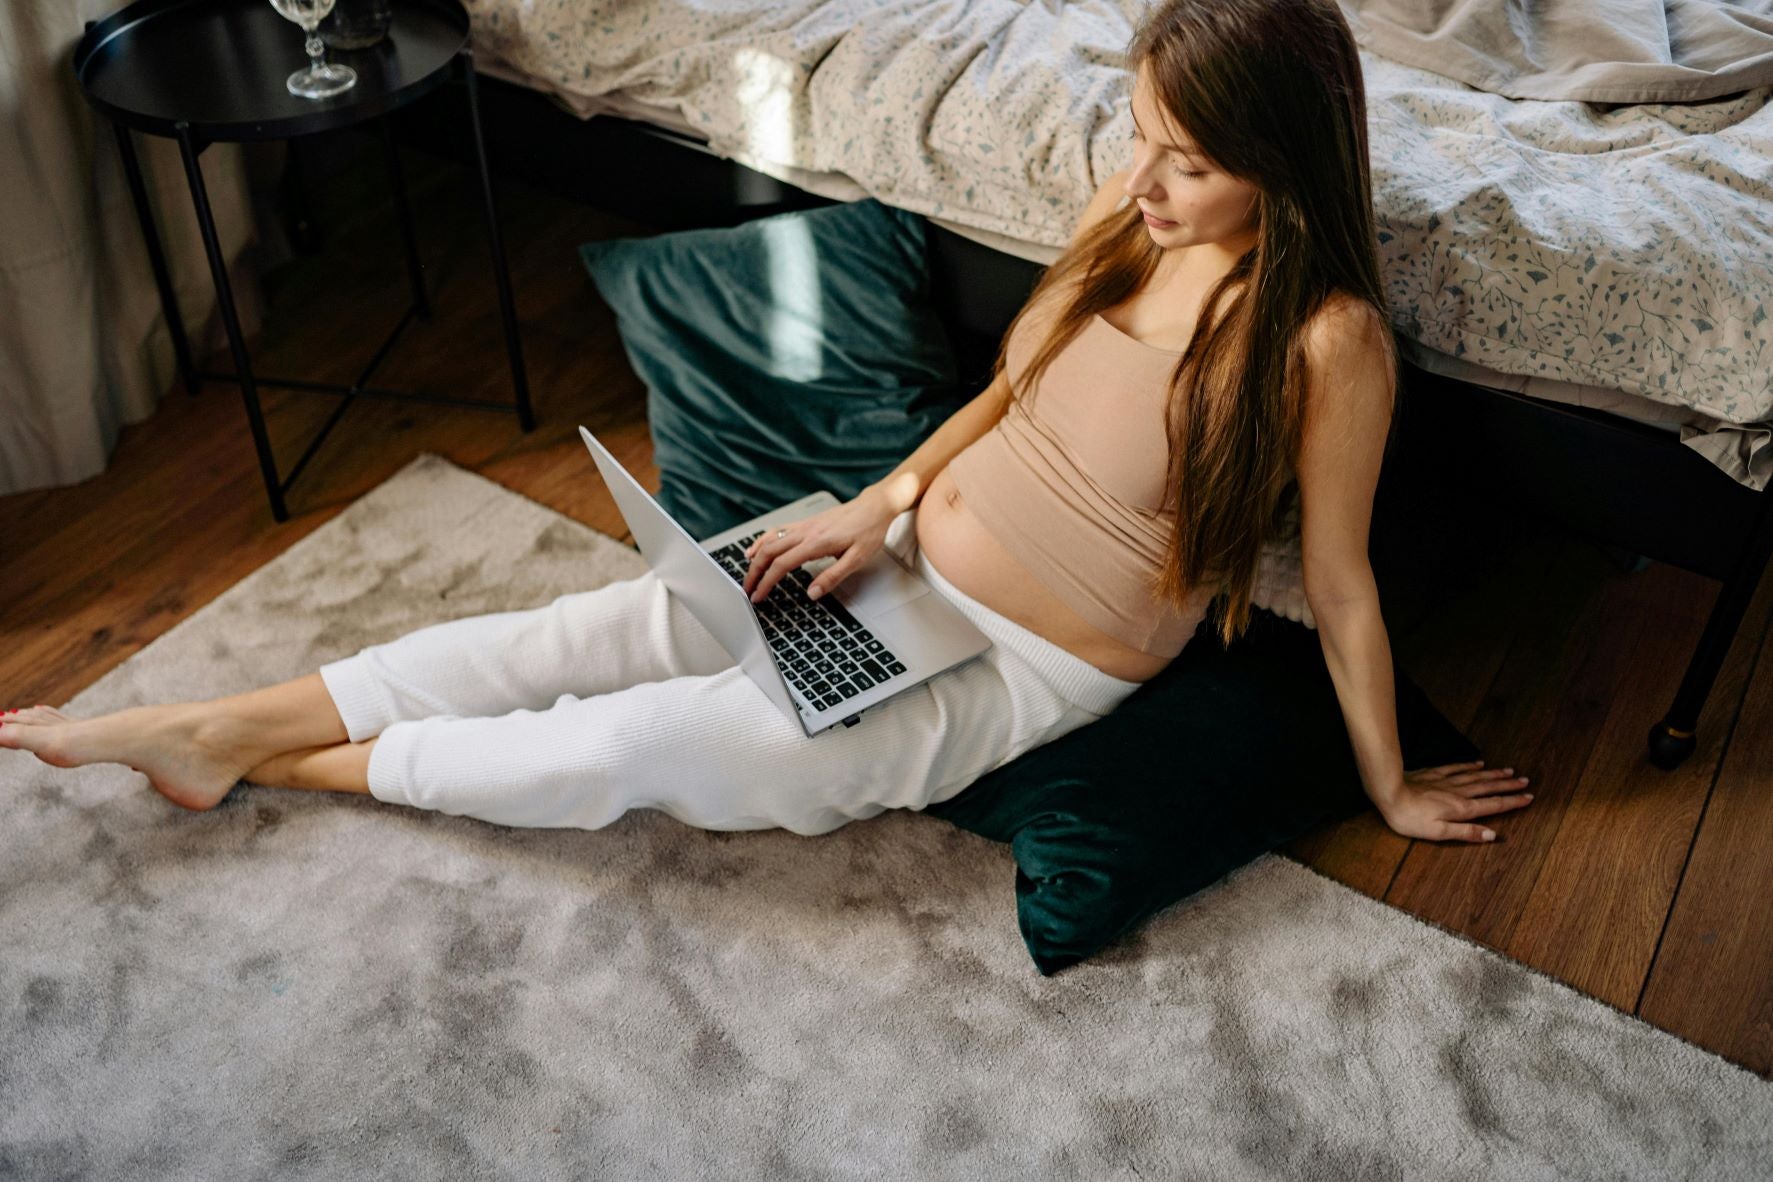 Sweet Dreams for Moms-to-Be: How U-Shaped Pillows Ease Pregnancy Discomforts